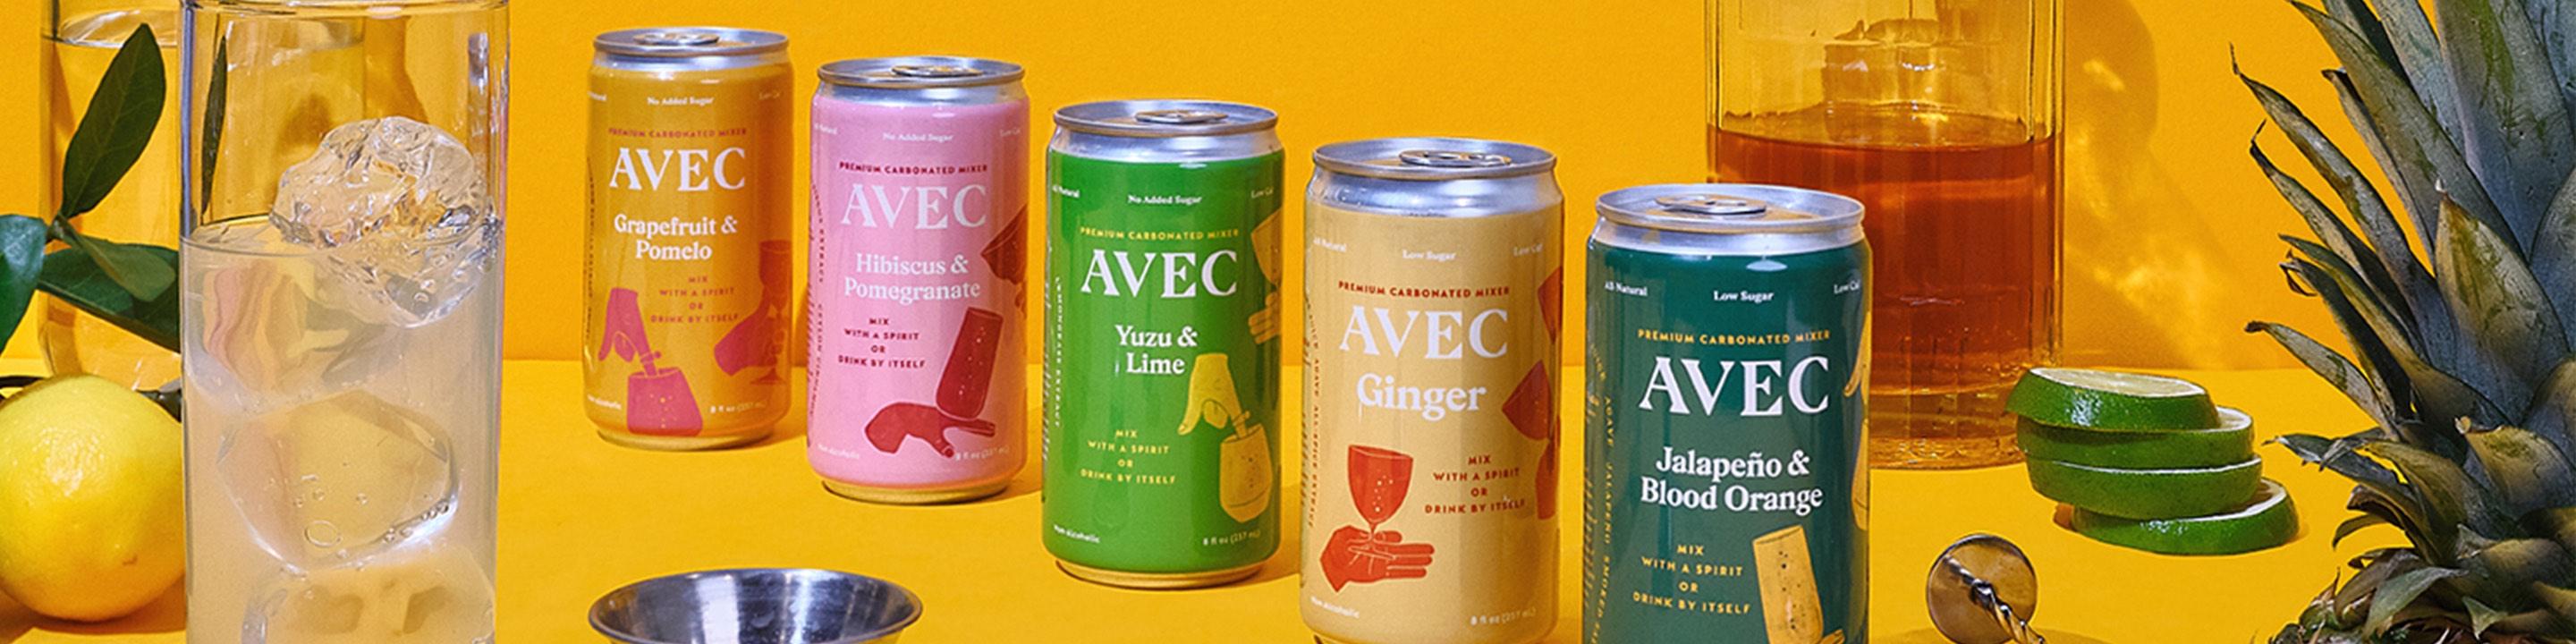 AVEC, a healthy alternative that makes drinking a little better for you without making it any less fun. Our five uniquely delicious, low calorie, low sugar flavors are made from real juices and natural botanicals, made to be mixed with your favorite liquor. And your favorite people.